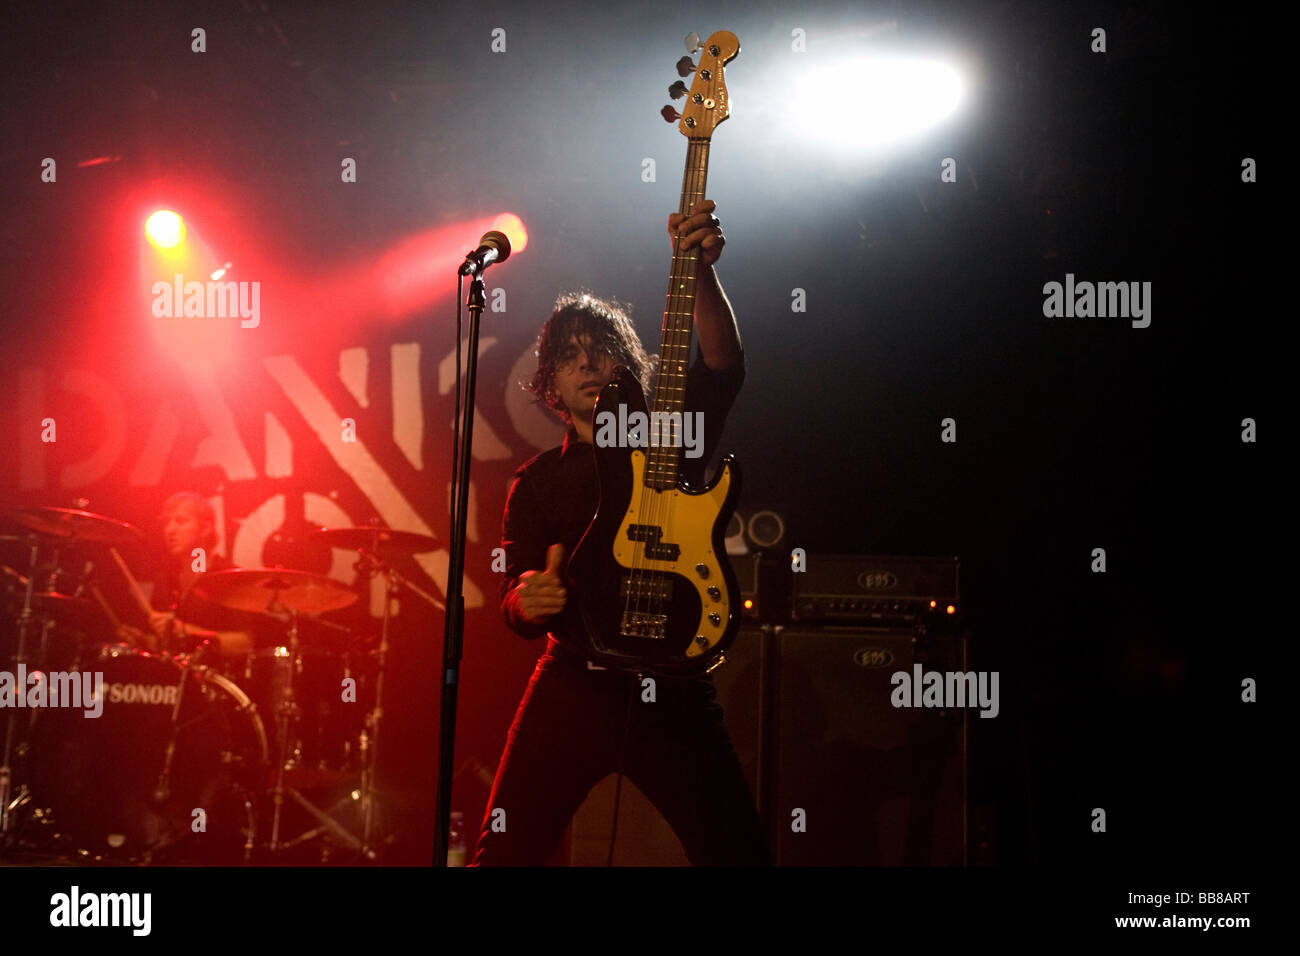 Giovanni Calabrese, bass player del canadese garage/blues/rock band Danko Jones, l'esecuzione di live at Schueuer concert hall, Lucer Foto Stock